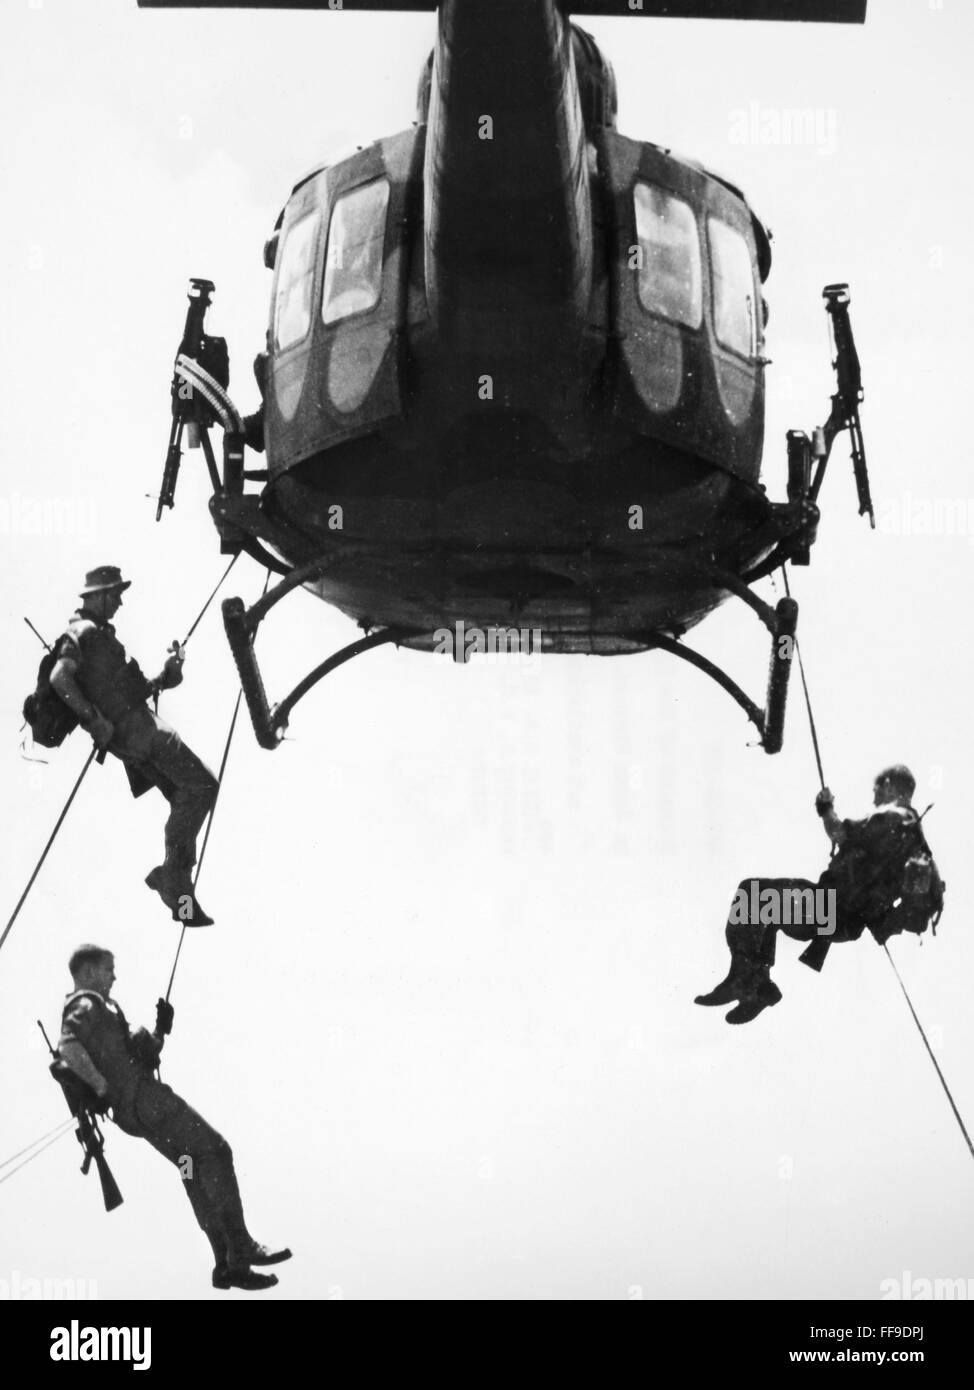 VIETNAM WAR: HELICOPTER. /nTroopers of the 173rd Airborne Brigade rappel from a helicopter in South Vietnam, December 1966. Stock Photo